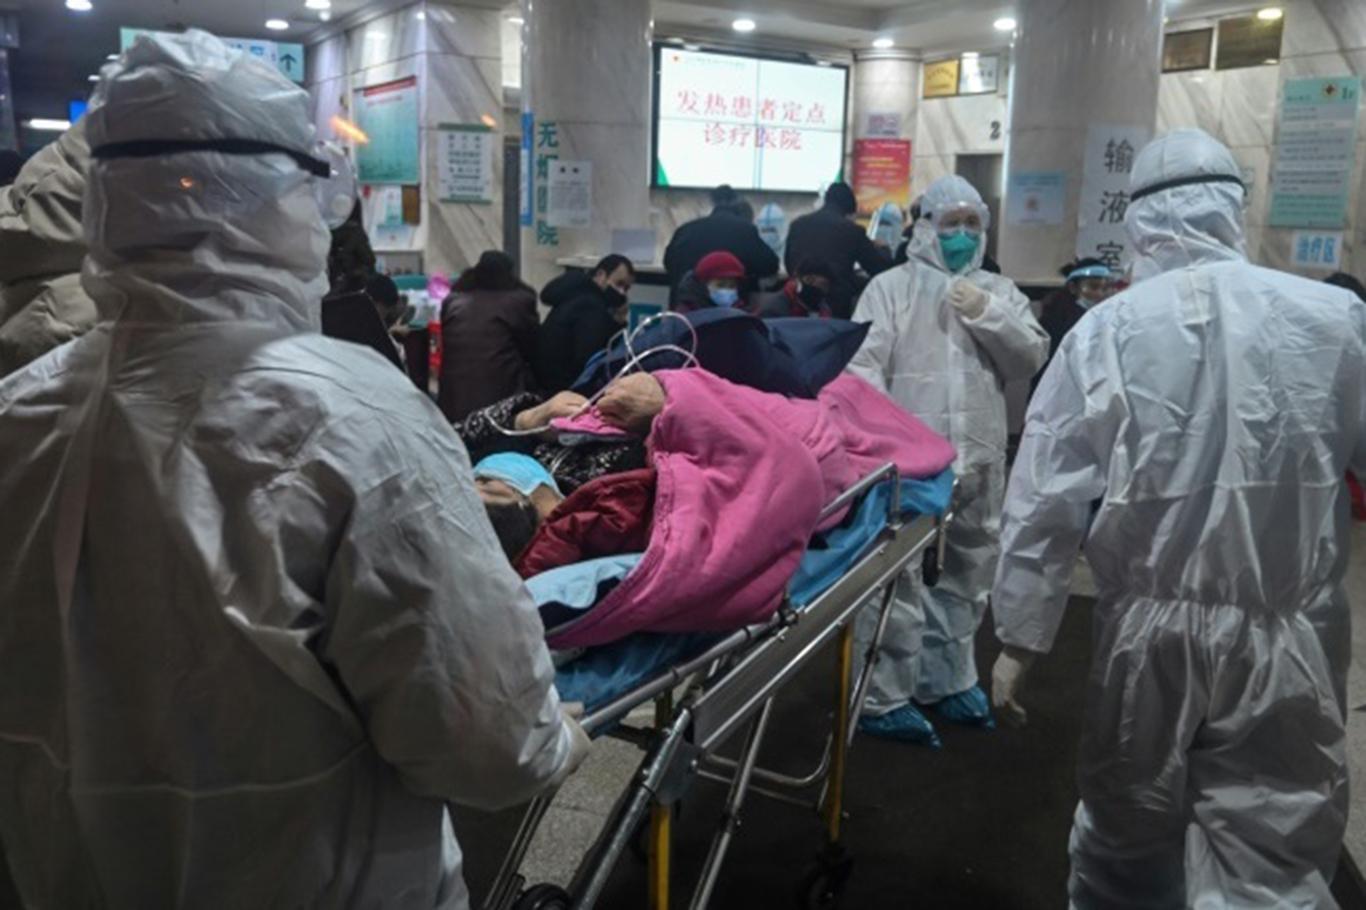 At least 1,716 health workers infected with coronavirus in China